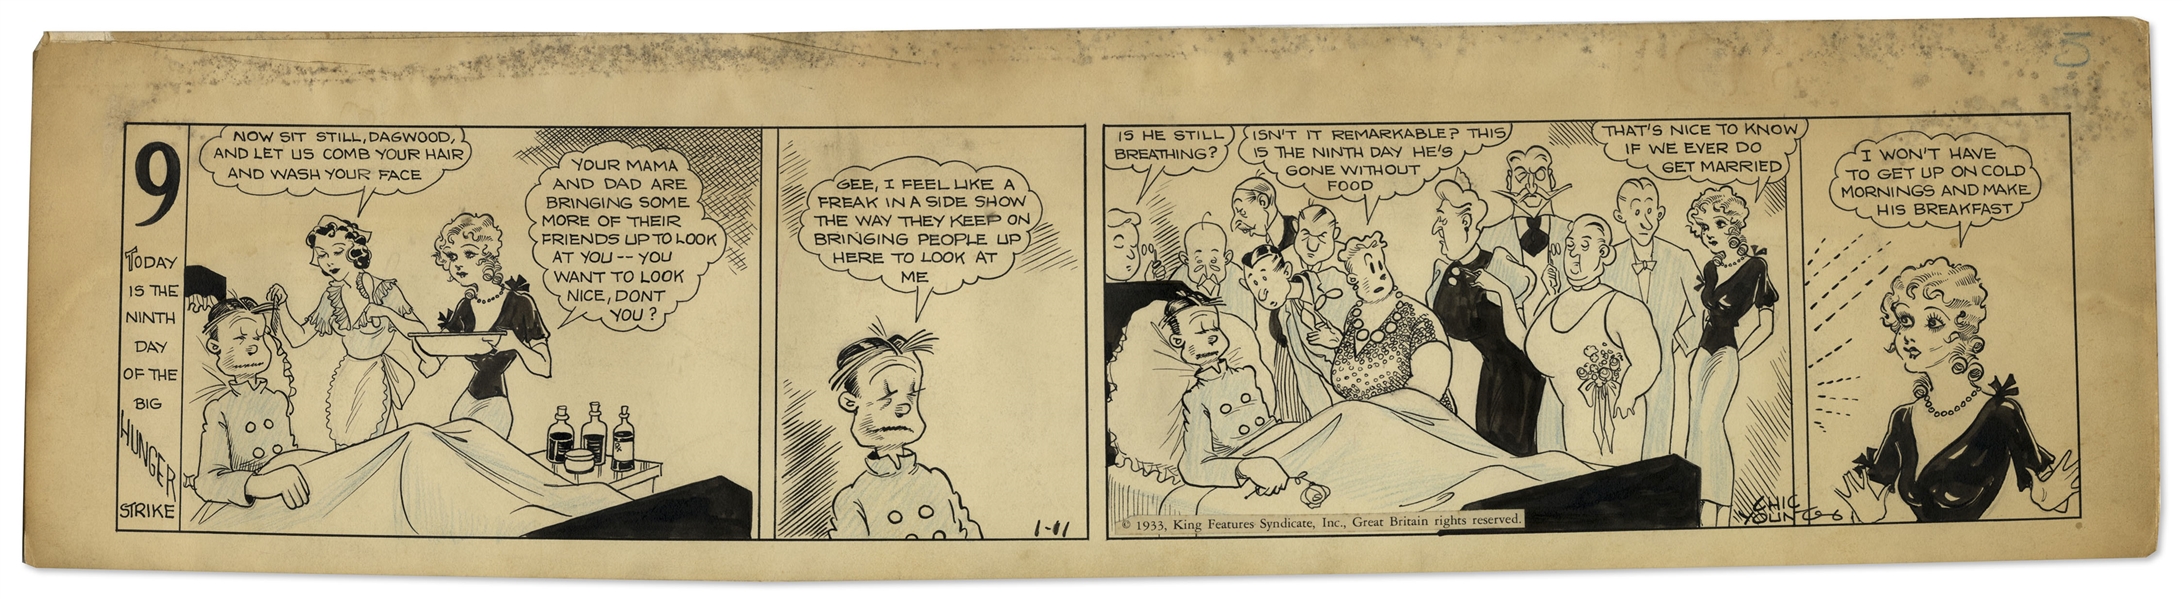 Chic Young Hand-Drawn ''Blondie'' Comic Strip From 1933 Titled ''Thanks For The Tip'' -- Day 9 of Dagwood's Famous Hunger Strike!